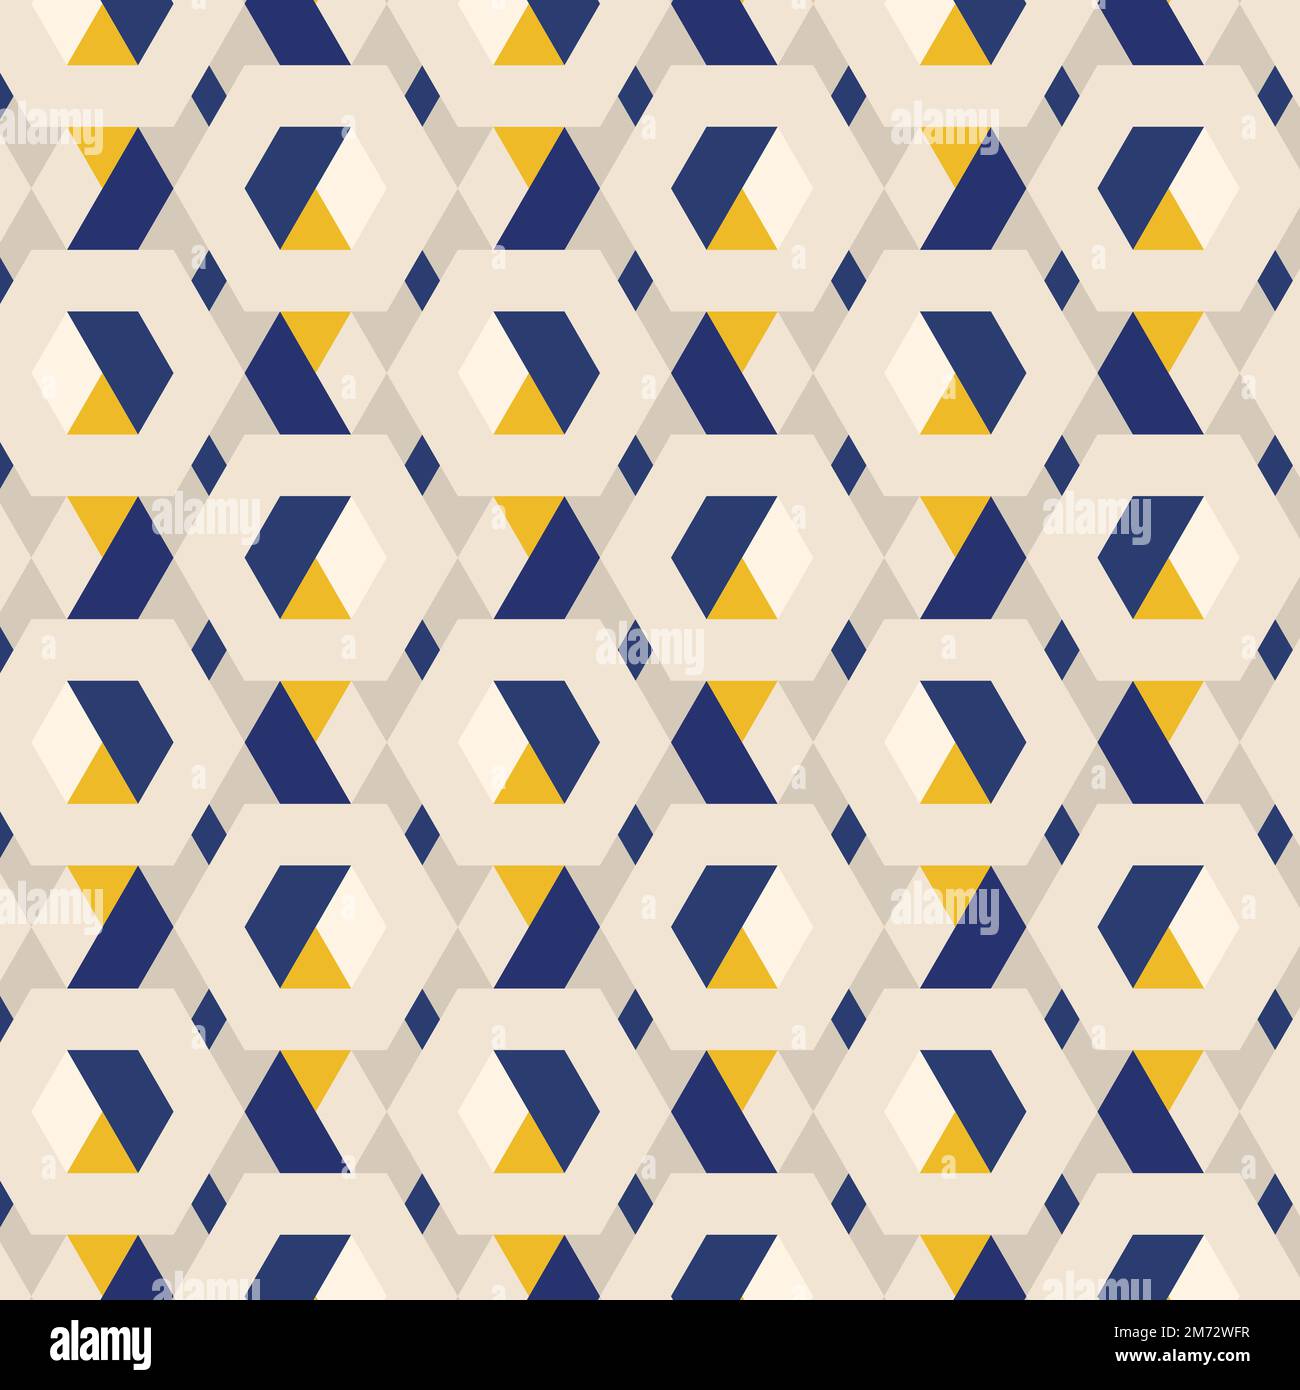 3D yellow and blue hexagonal patterned background vector Stock Vector